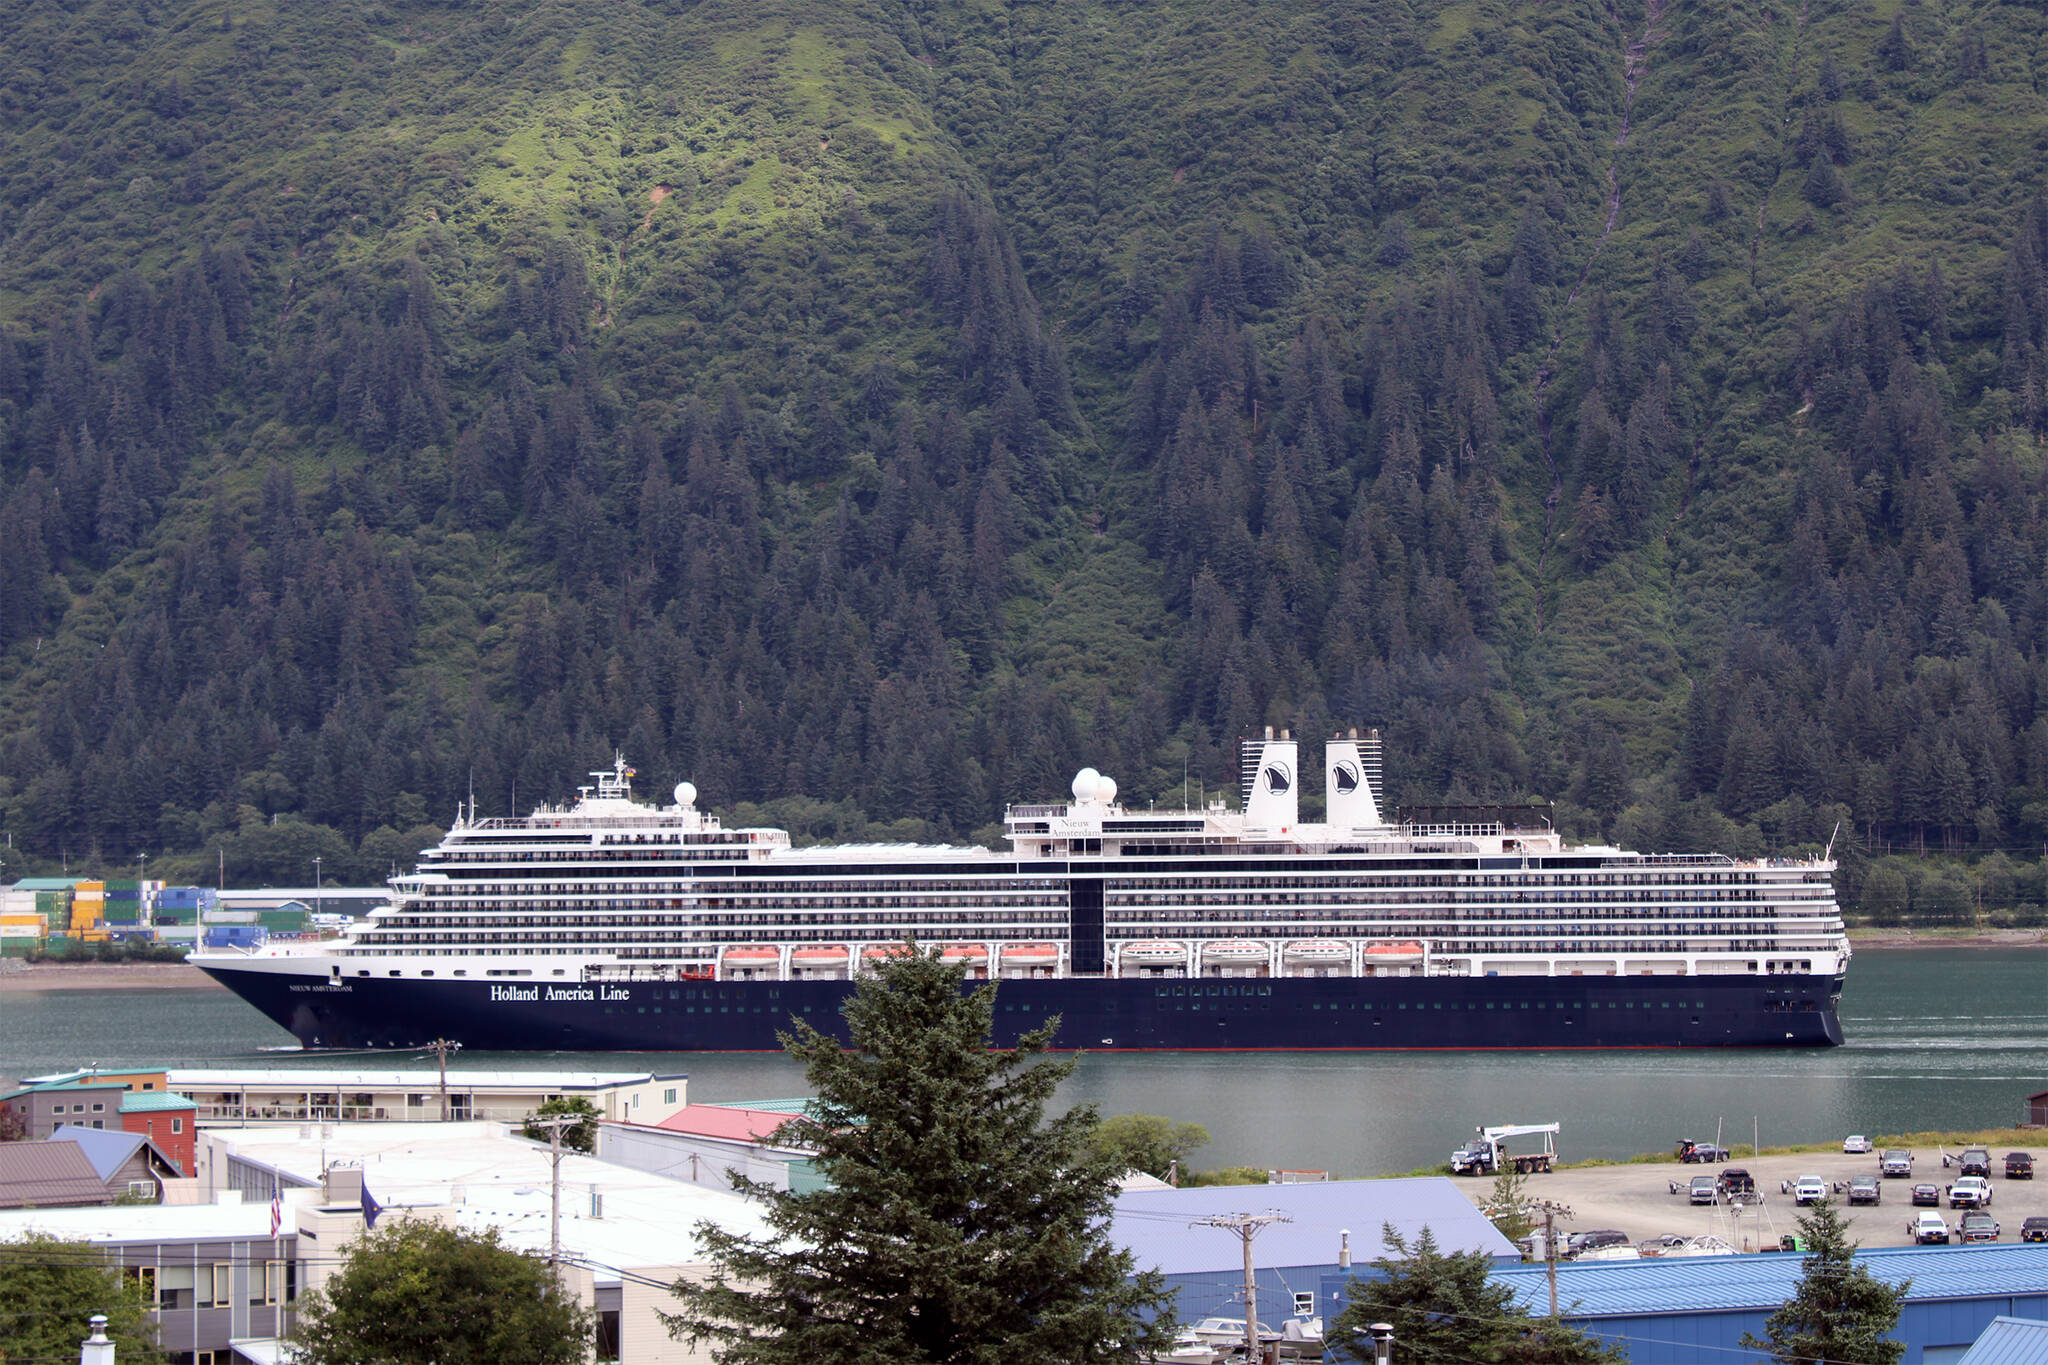 The MS Nieuw Amsterdam sails into Juneau on July 26, 2021. On Monday night, city leaders reviewed the results of a community survey aimed at learning more about community attitudes about the impact of large cruise ships. (Dana Zigmund/Juneau Empire)